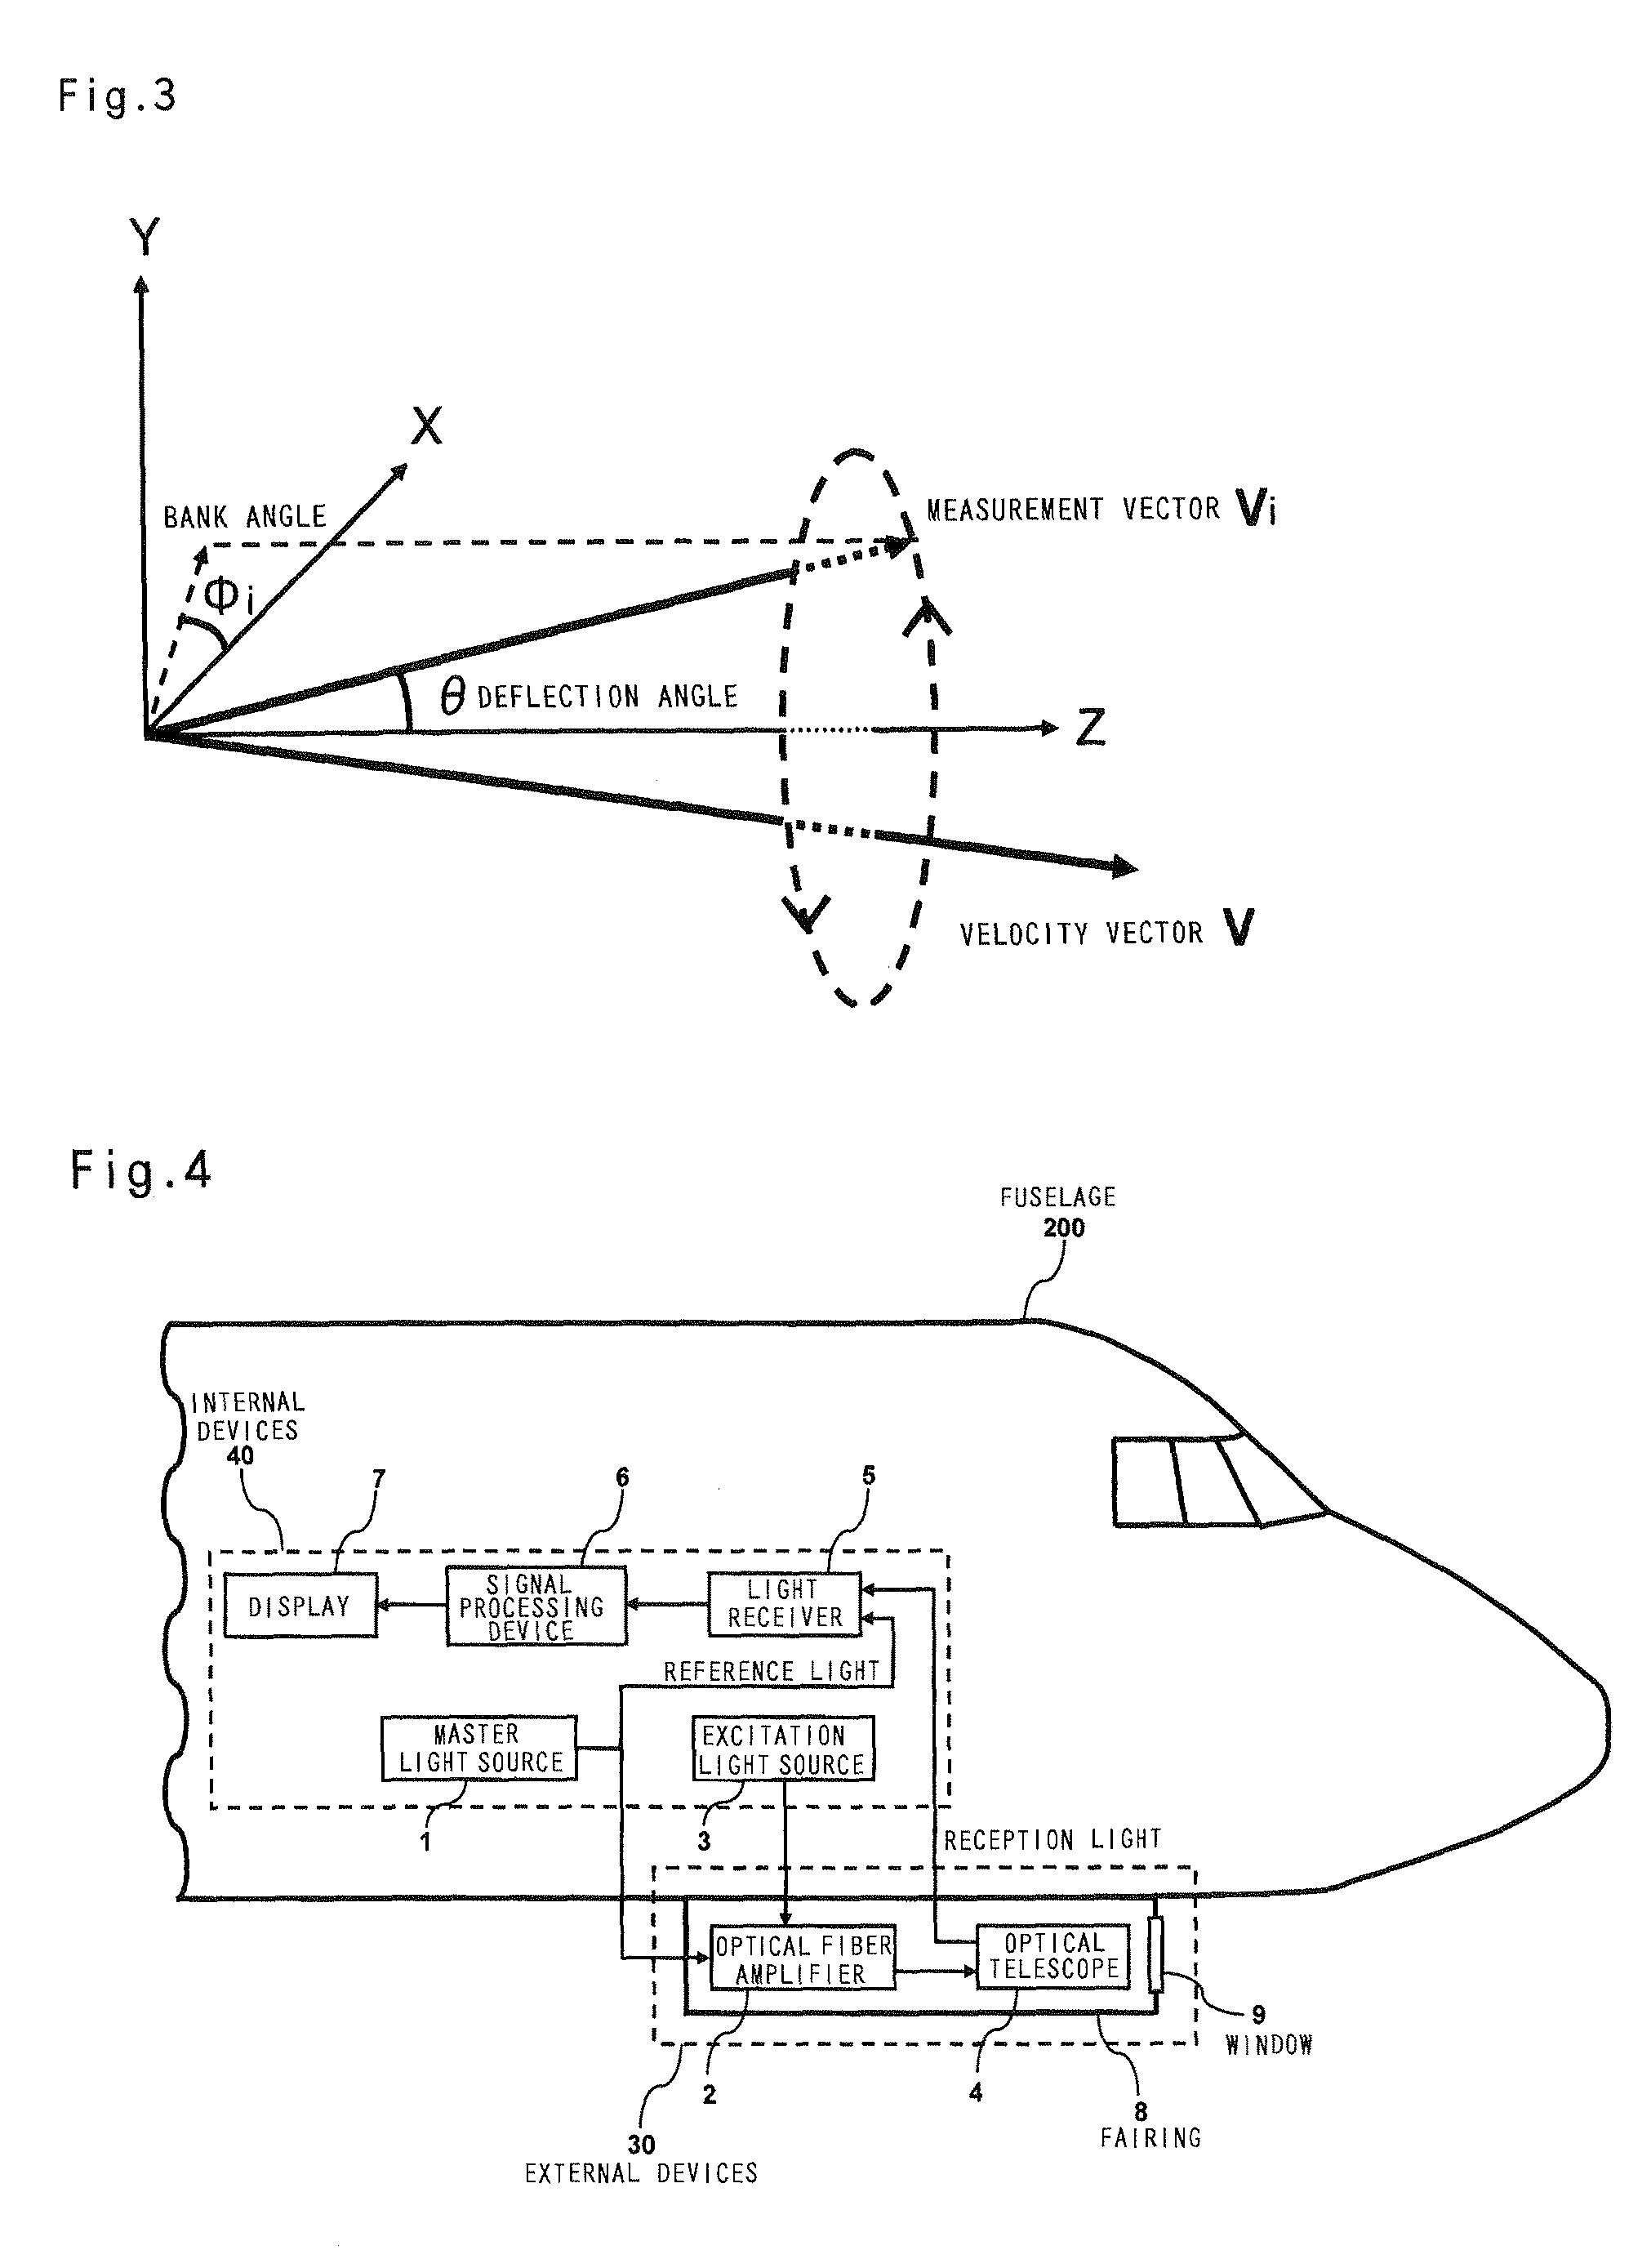 Method for measuring airspeed by optical air data sensor